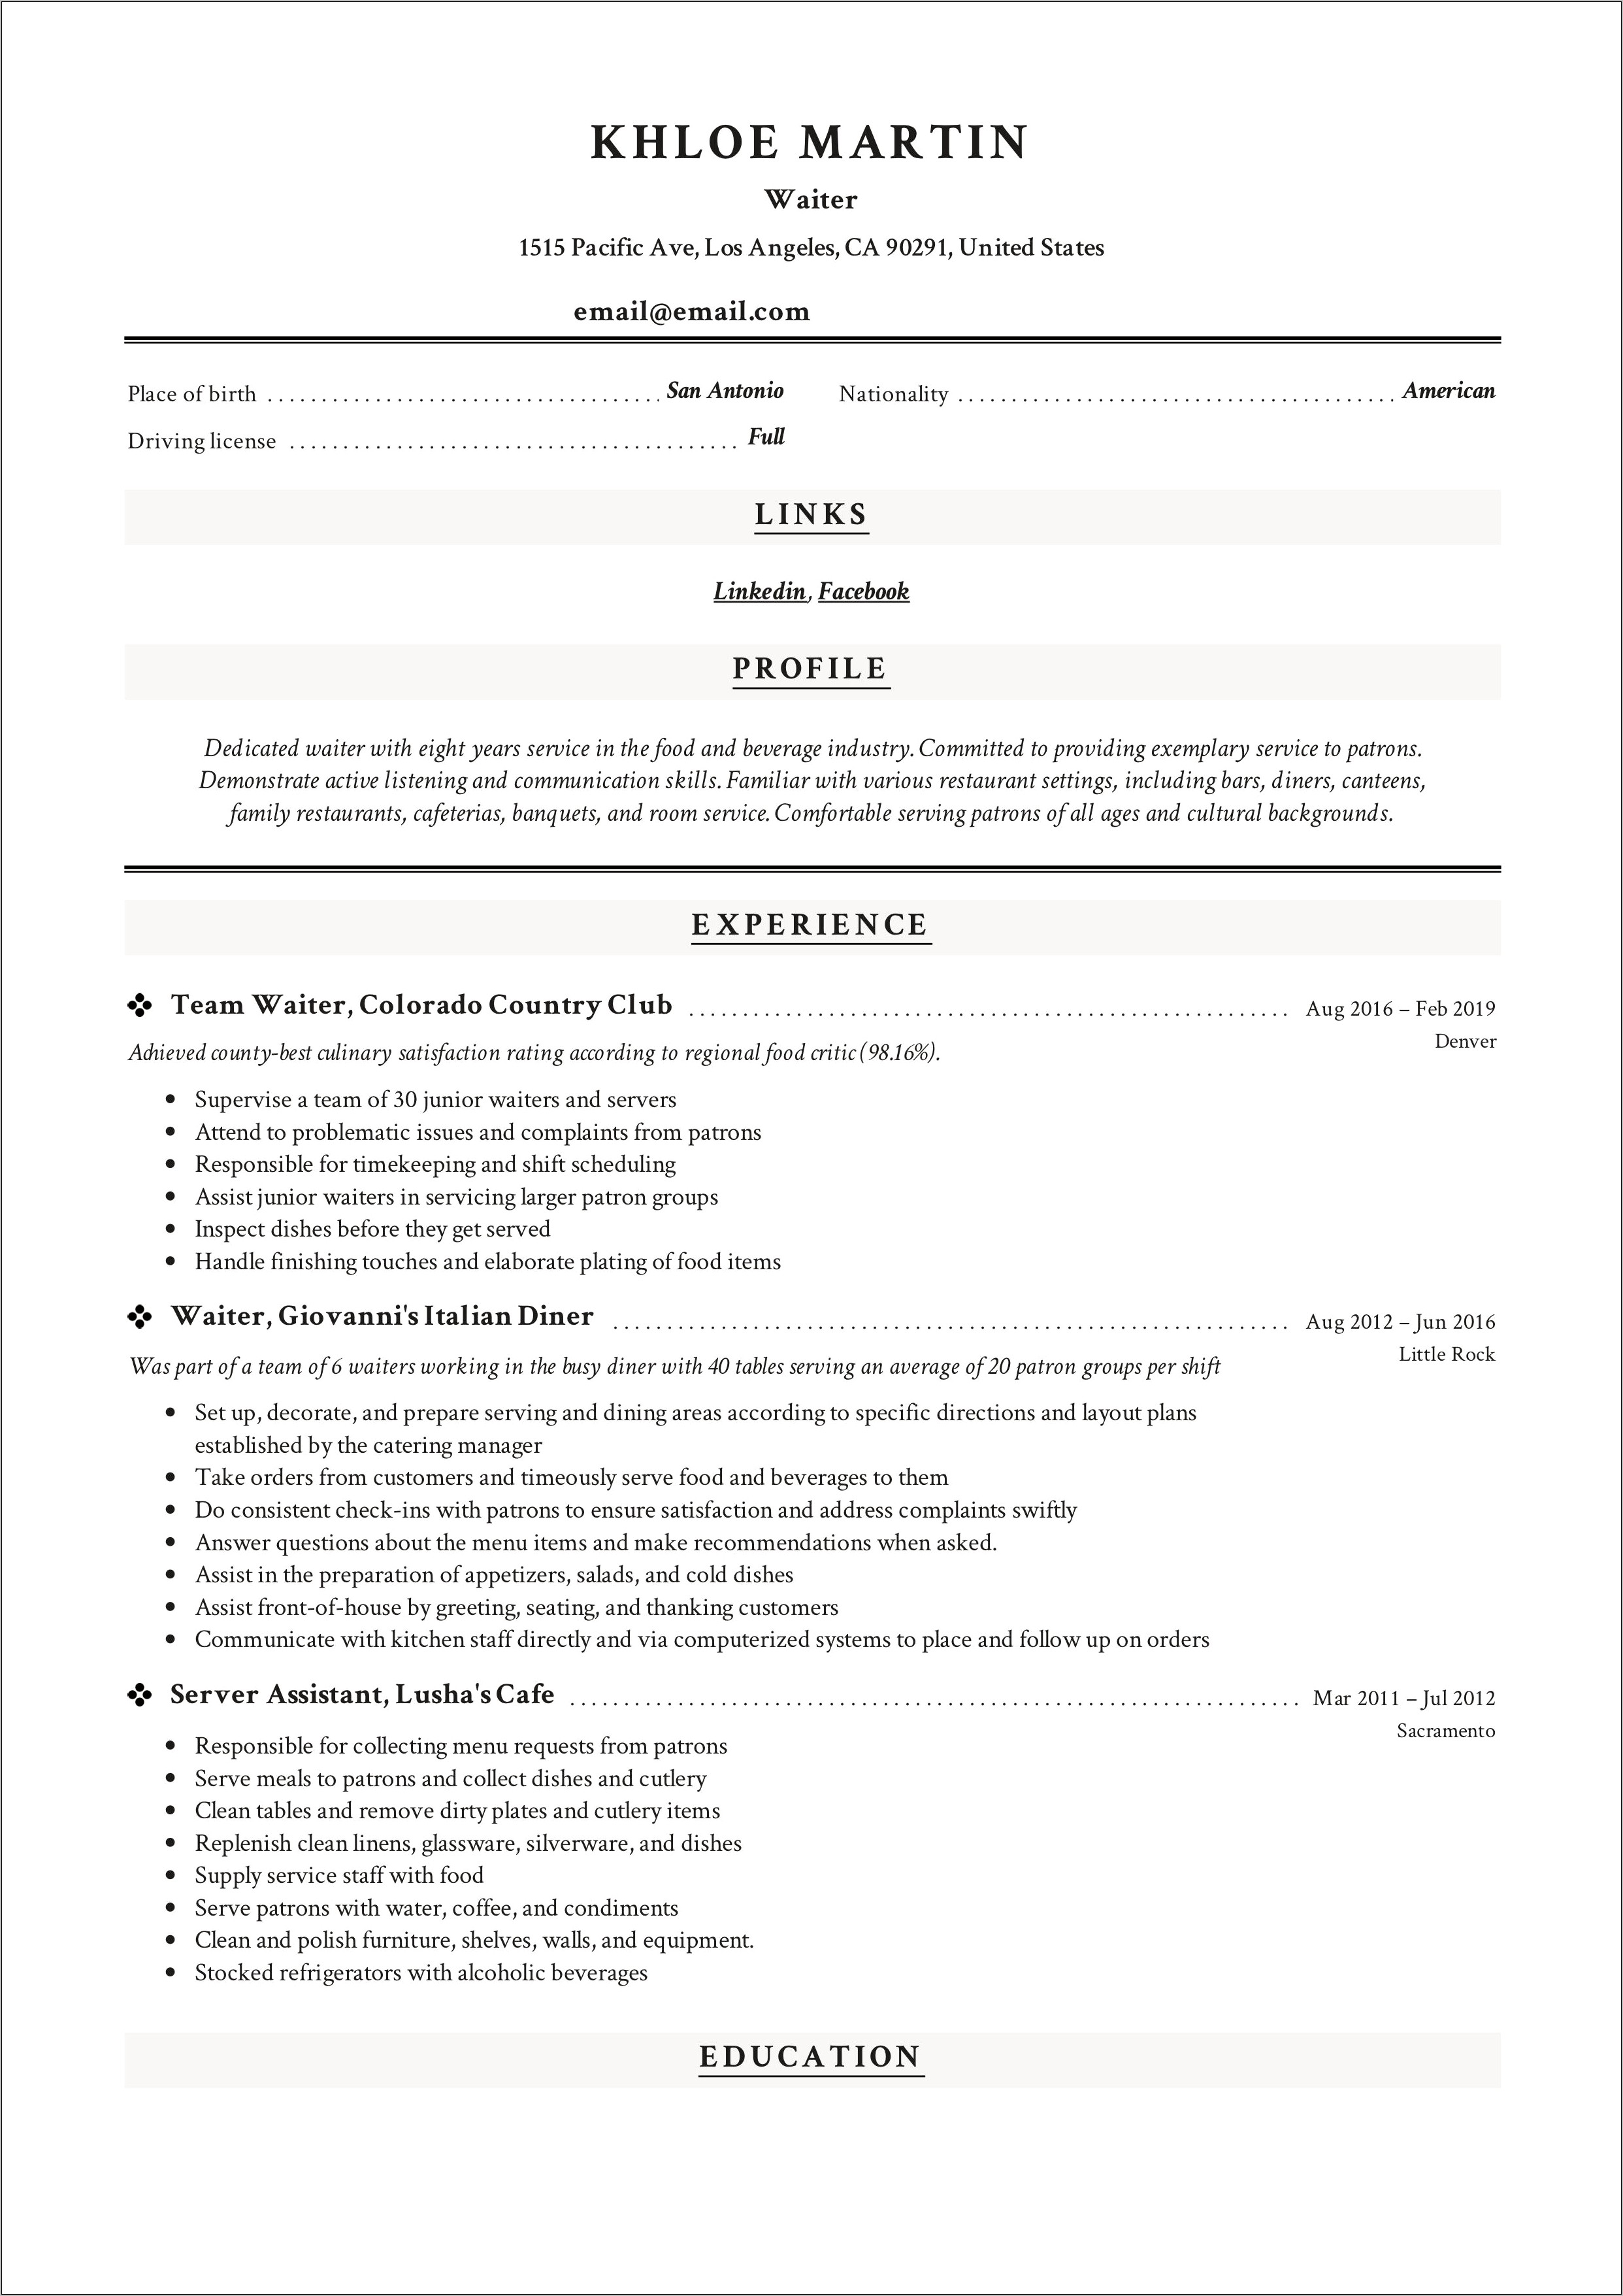 Examples Of Resumes In 2019